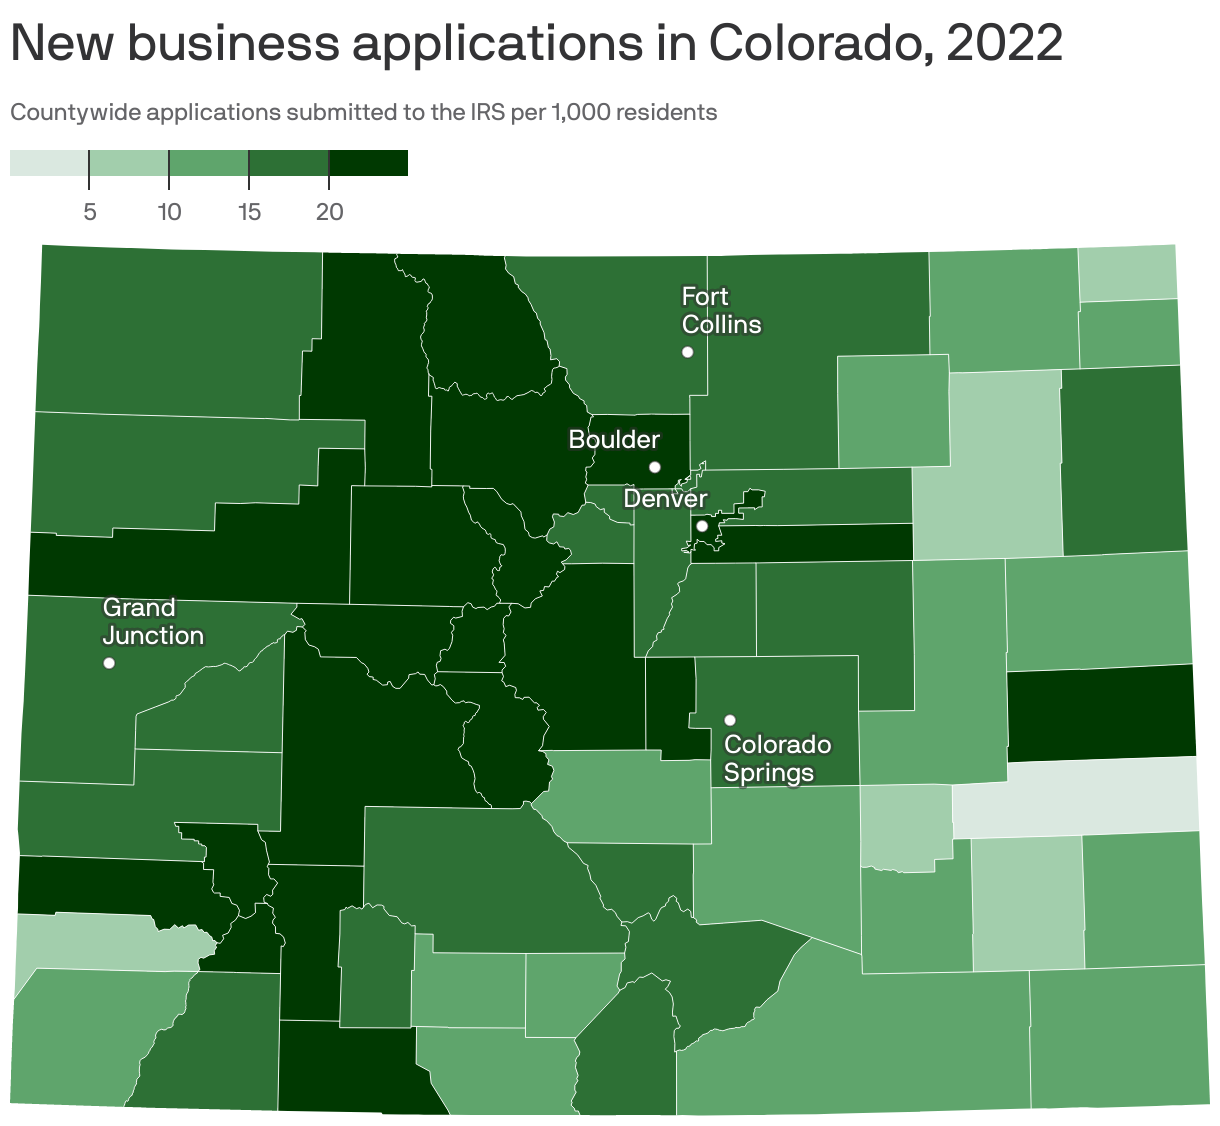 New business applications in Colorado, 2022